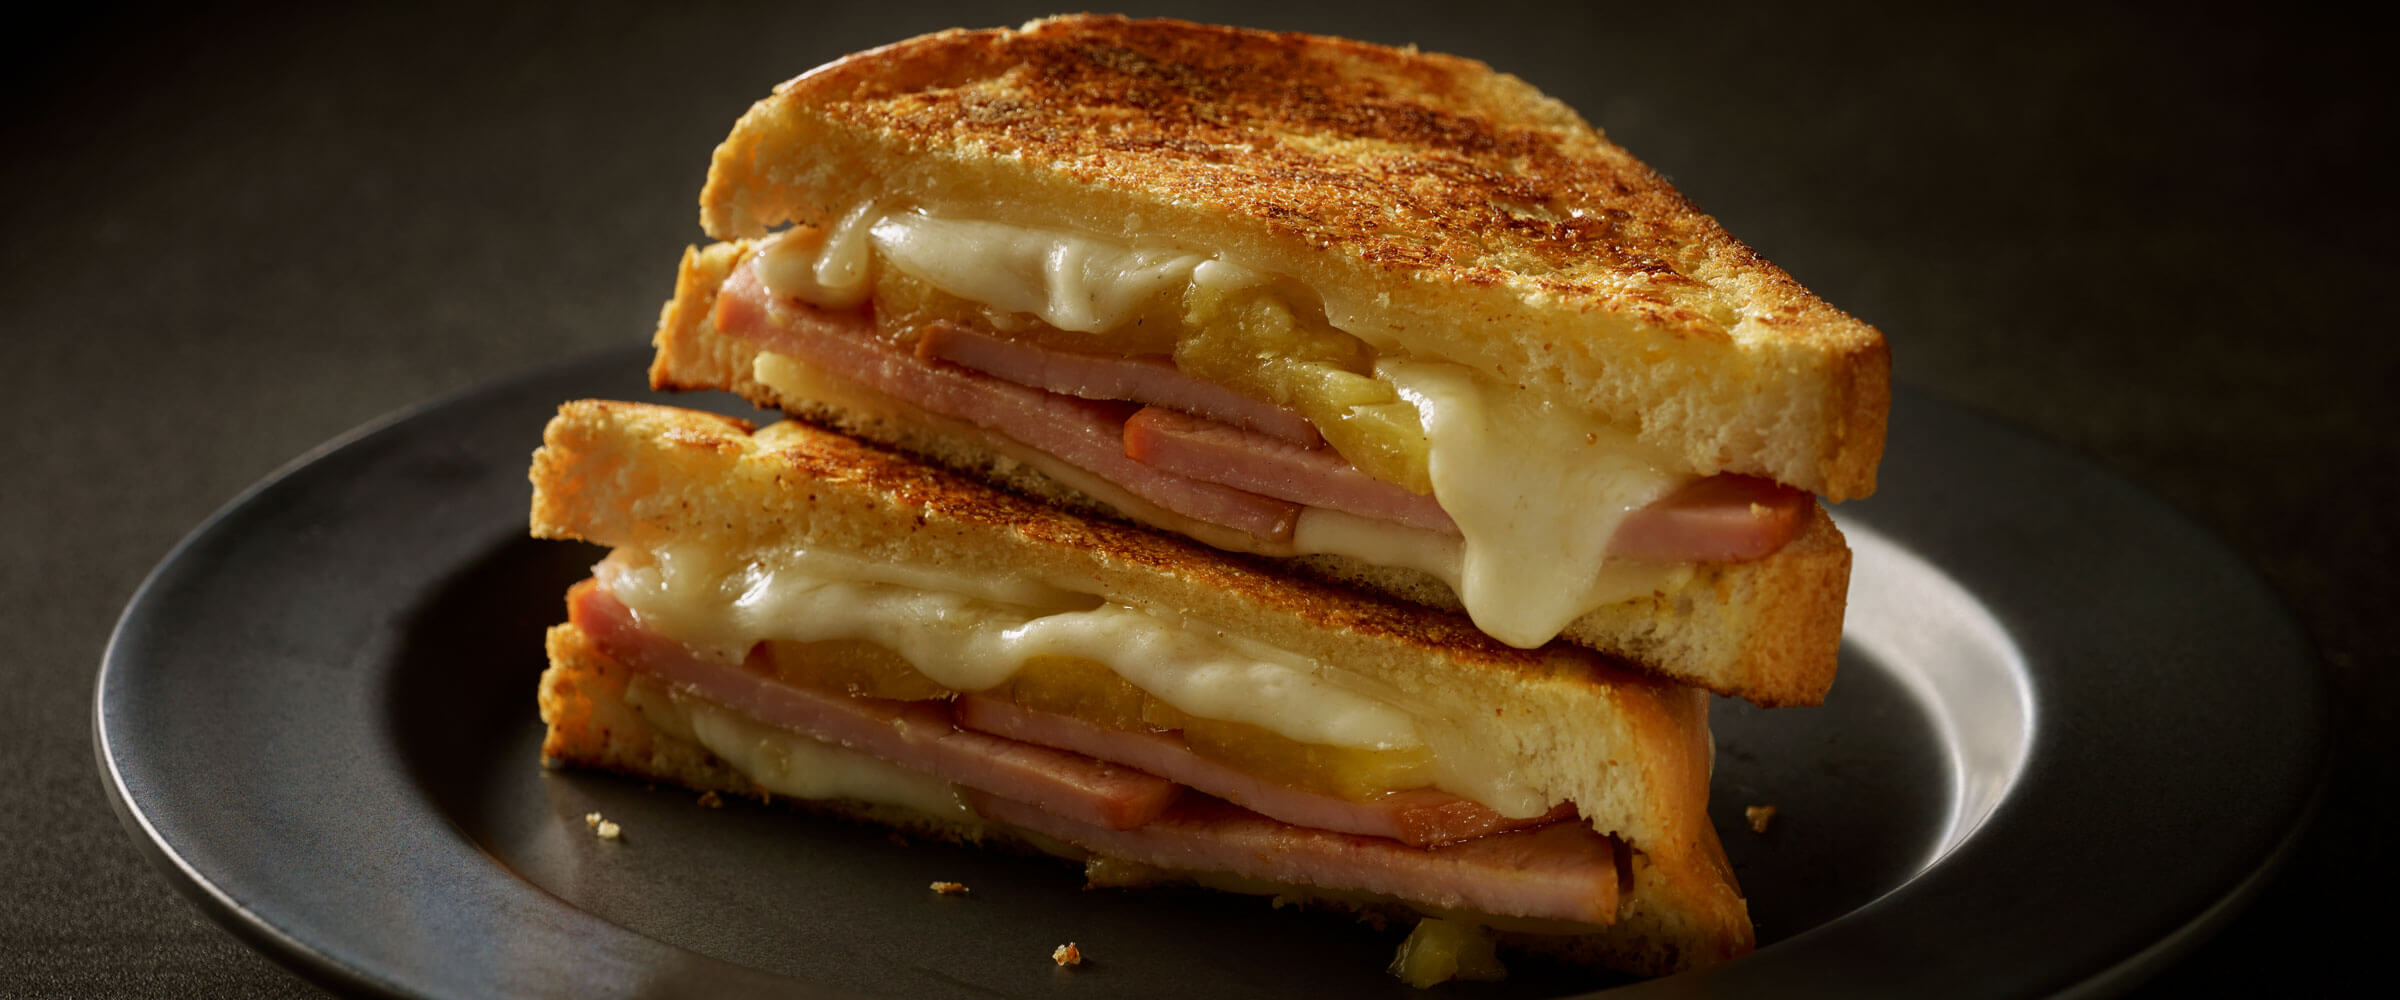 Hawaiian Grilled Cheese and Canadian Bacon Sandwich on black plate